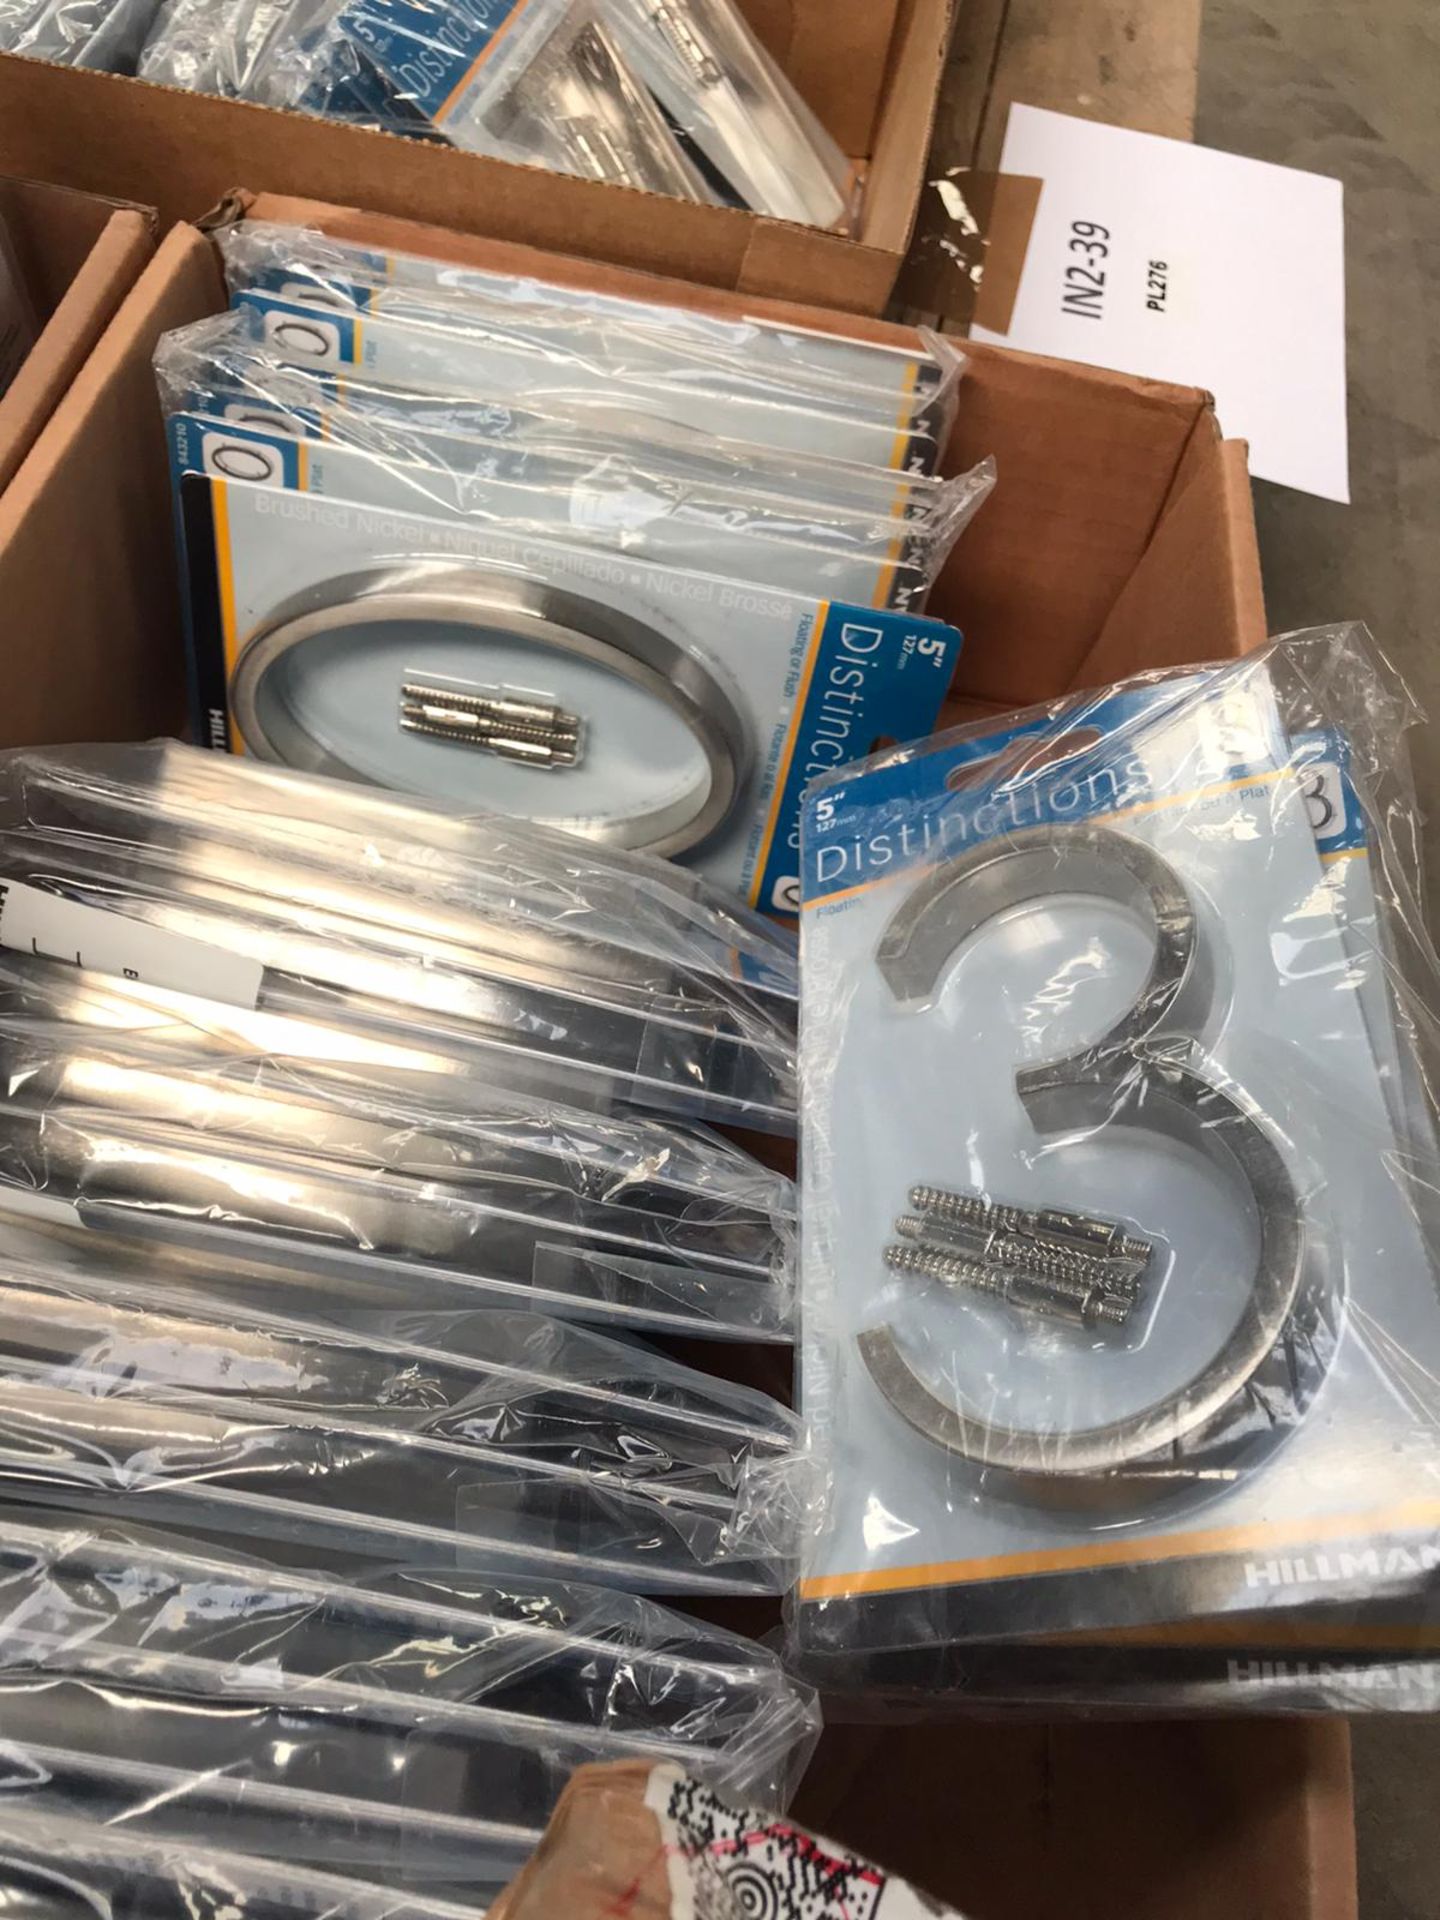 1 x Pallet Job Lot of Large Door Number Plaques in Silver - Brand New Stock - CL538 - Ref: Pallet - Image 3 of 14